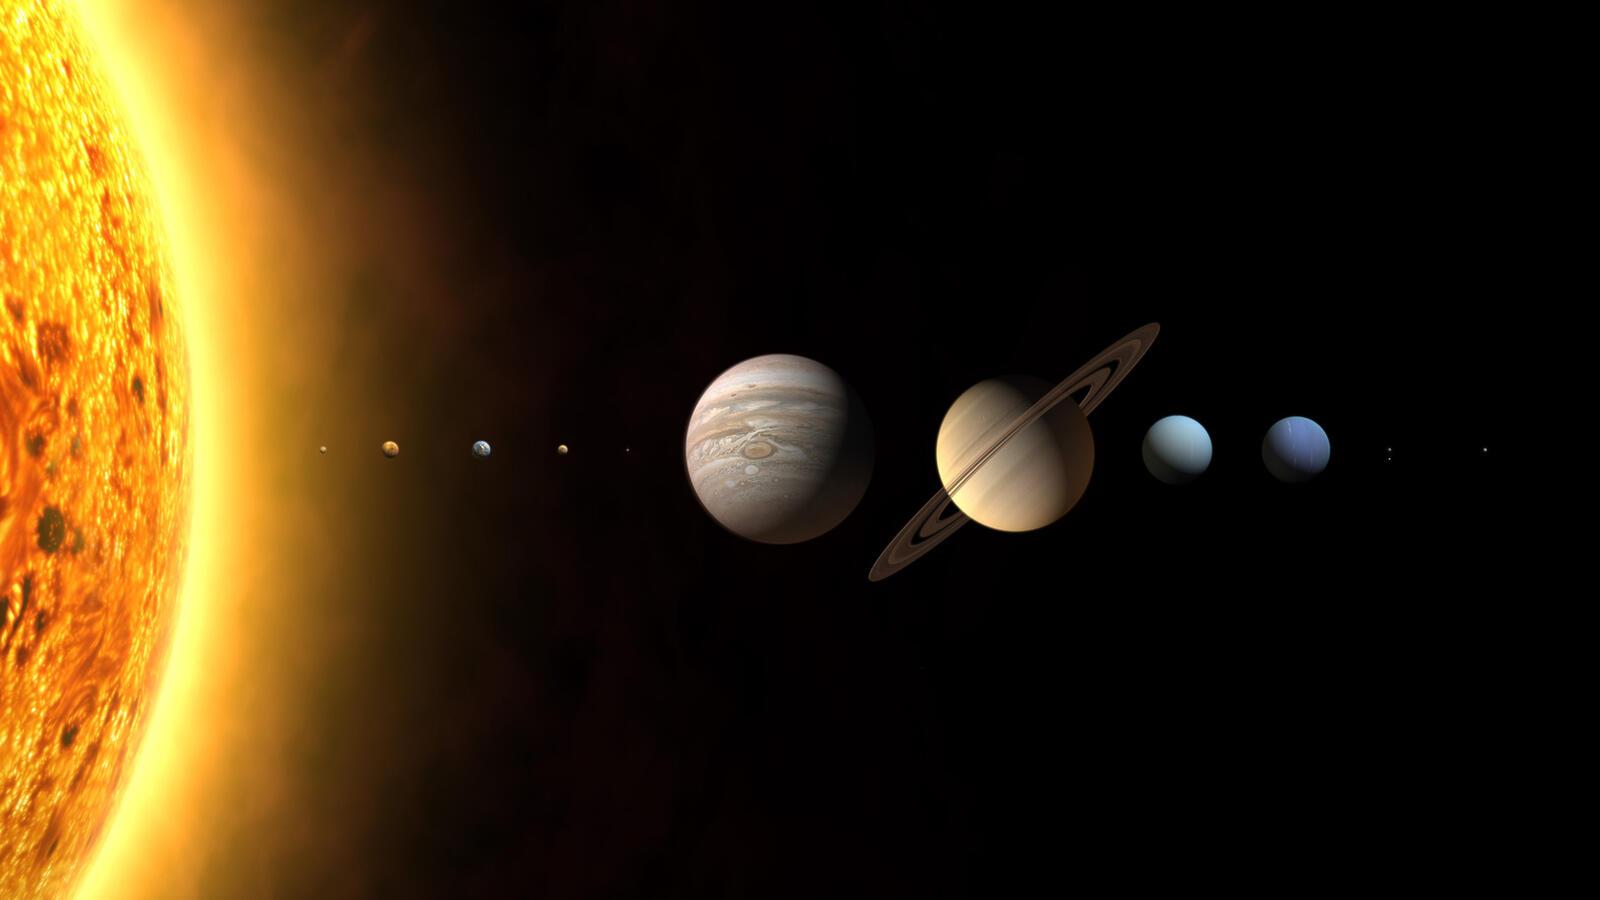 Wallpapers solar system planets earth on the desktop